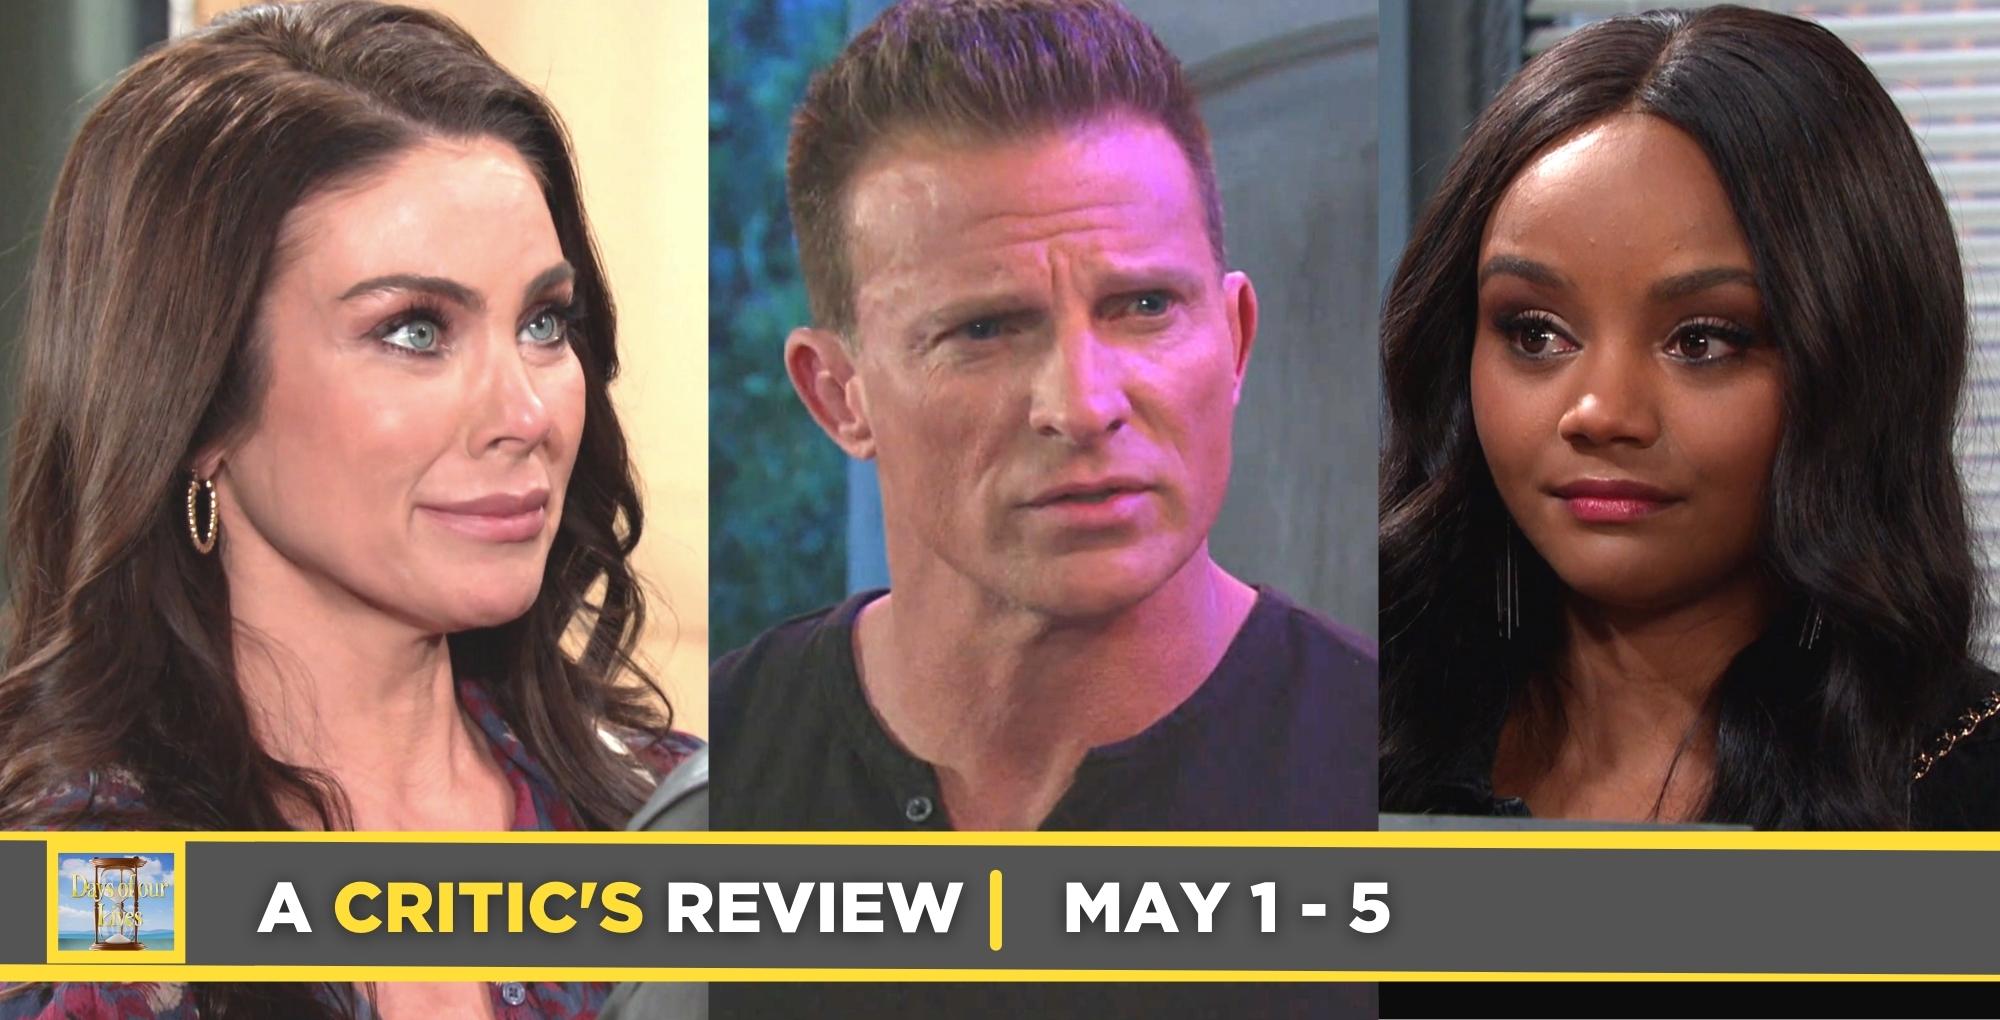 days of our lives critic's review for may 1 – may 5, 2023, three images chloe, harris, and chanel.